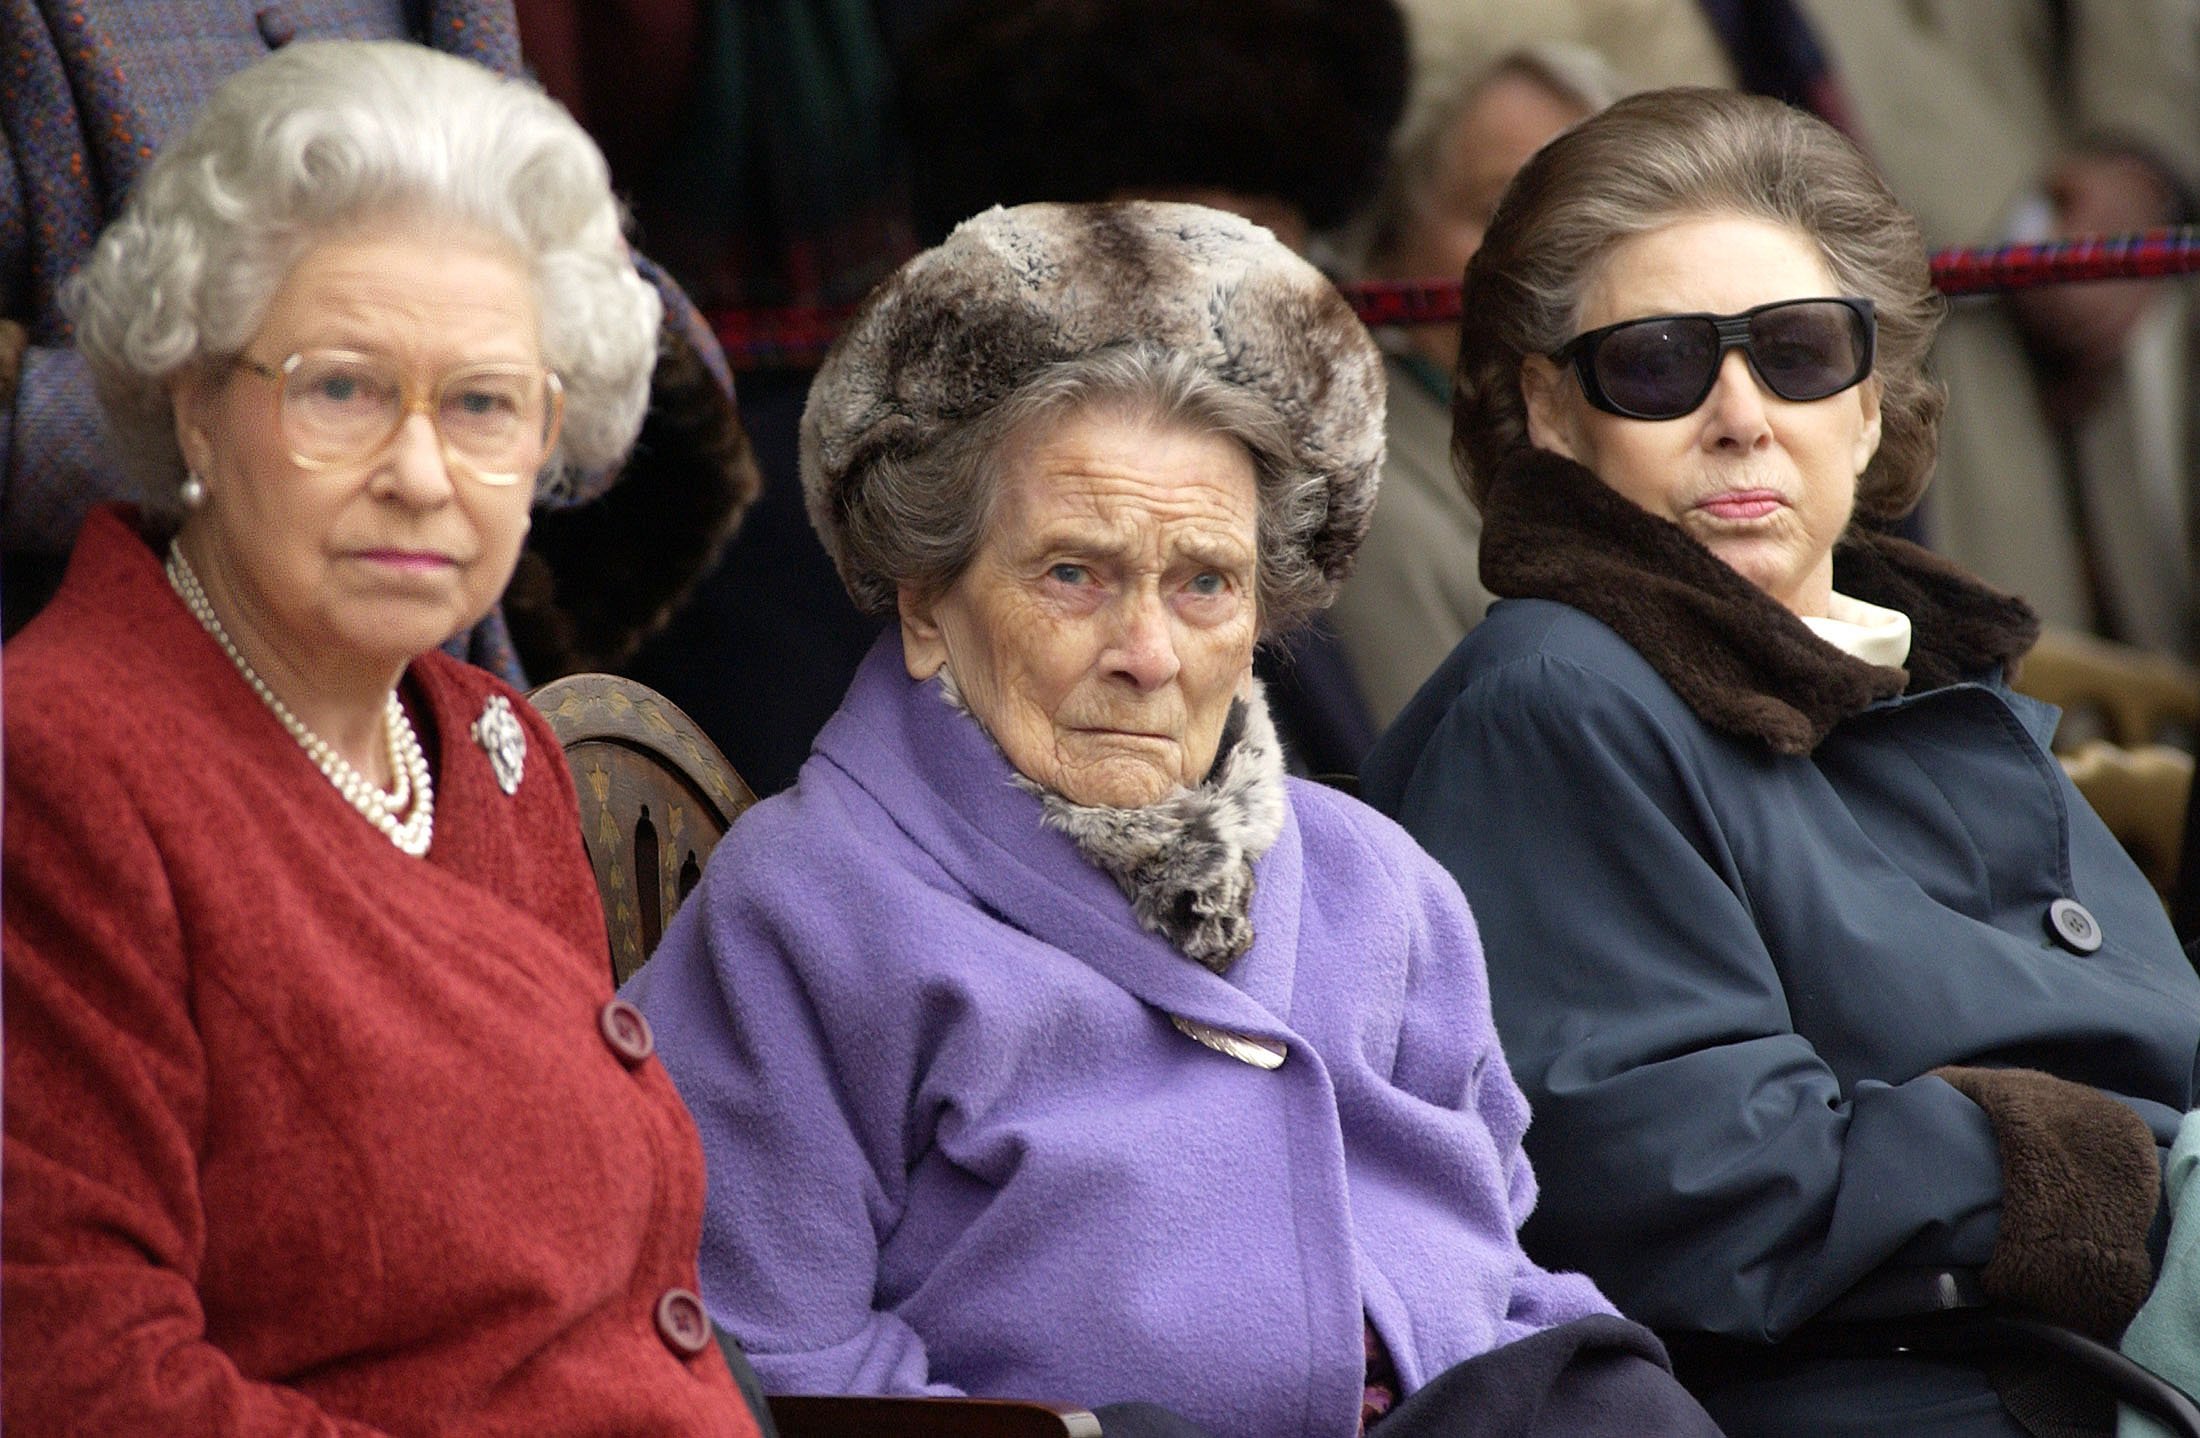 She attends the 100th birthday celebrations of her aunt Princess Alice, pictured centre, along with the Queen in December 2001